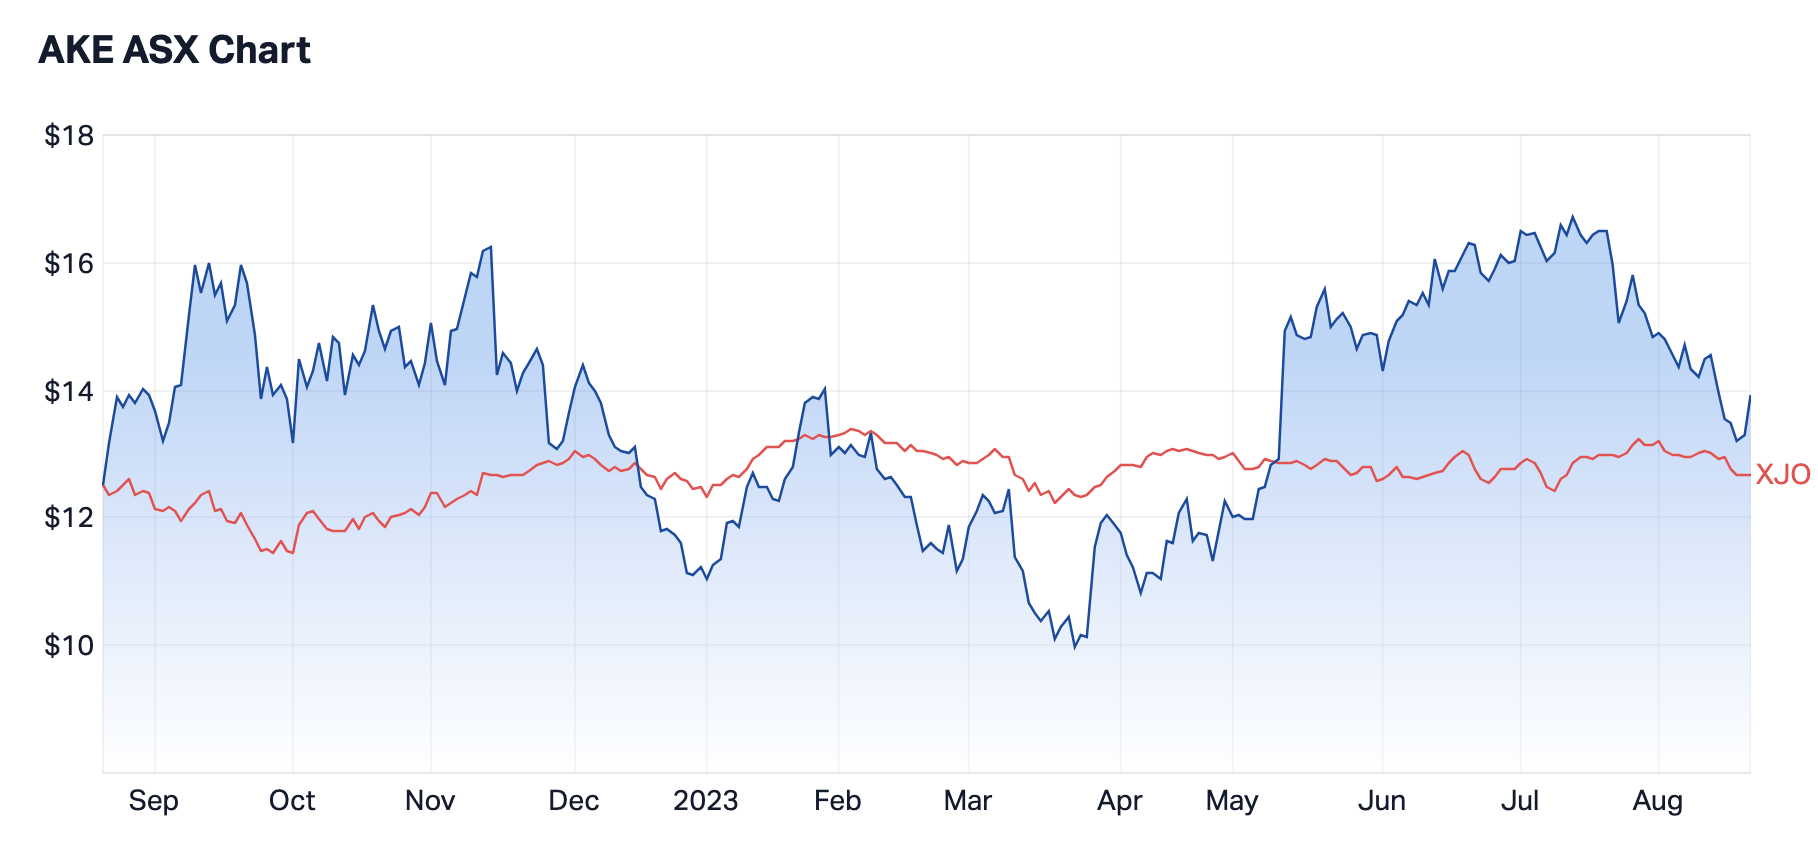 Allkem's 12-month share price versus the ASX 200, as shown by the red line (Source: Market Index)